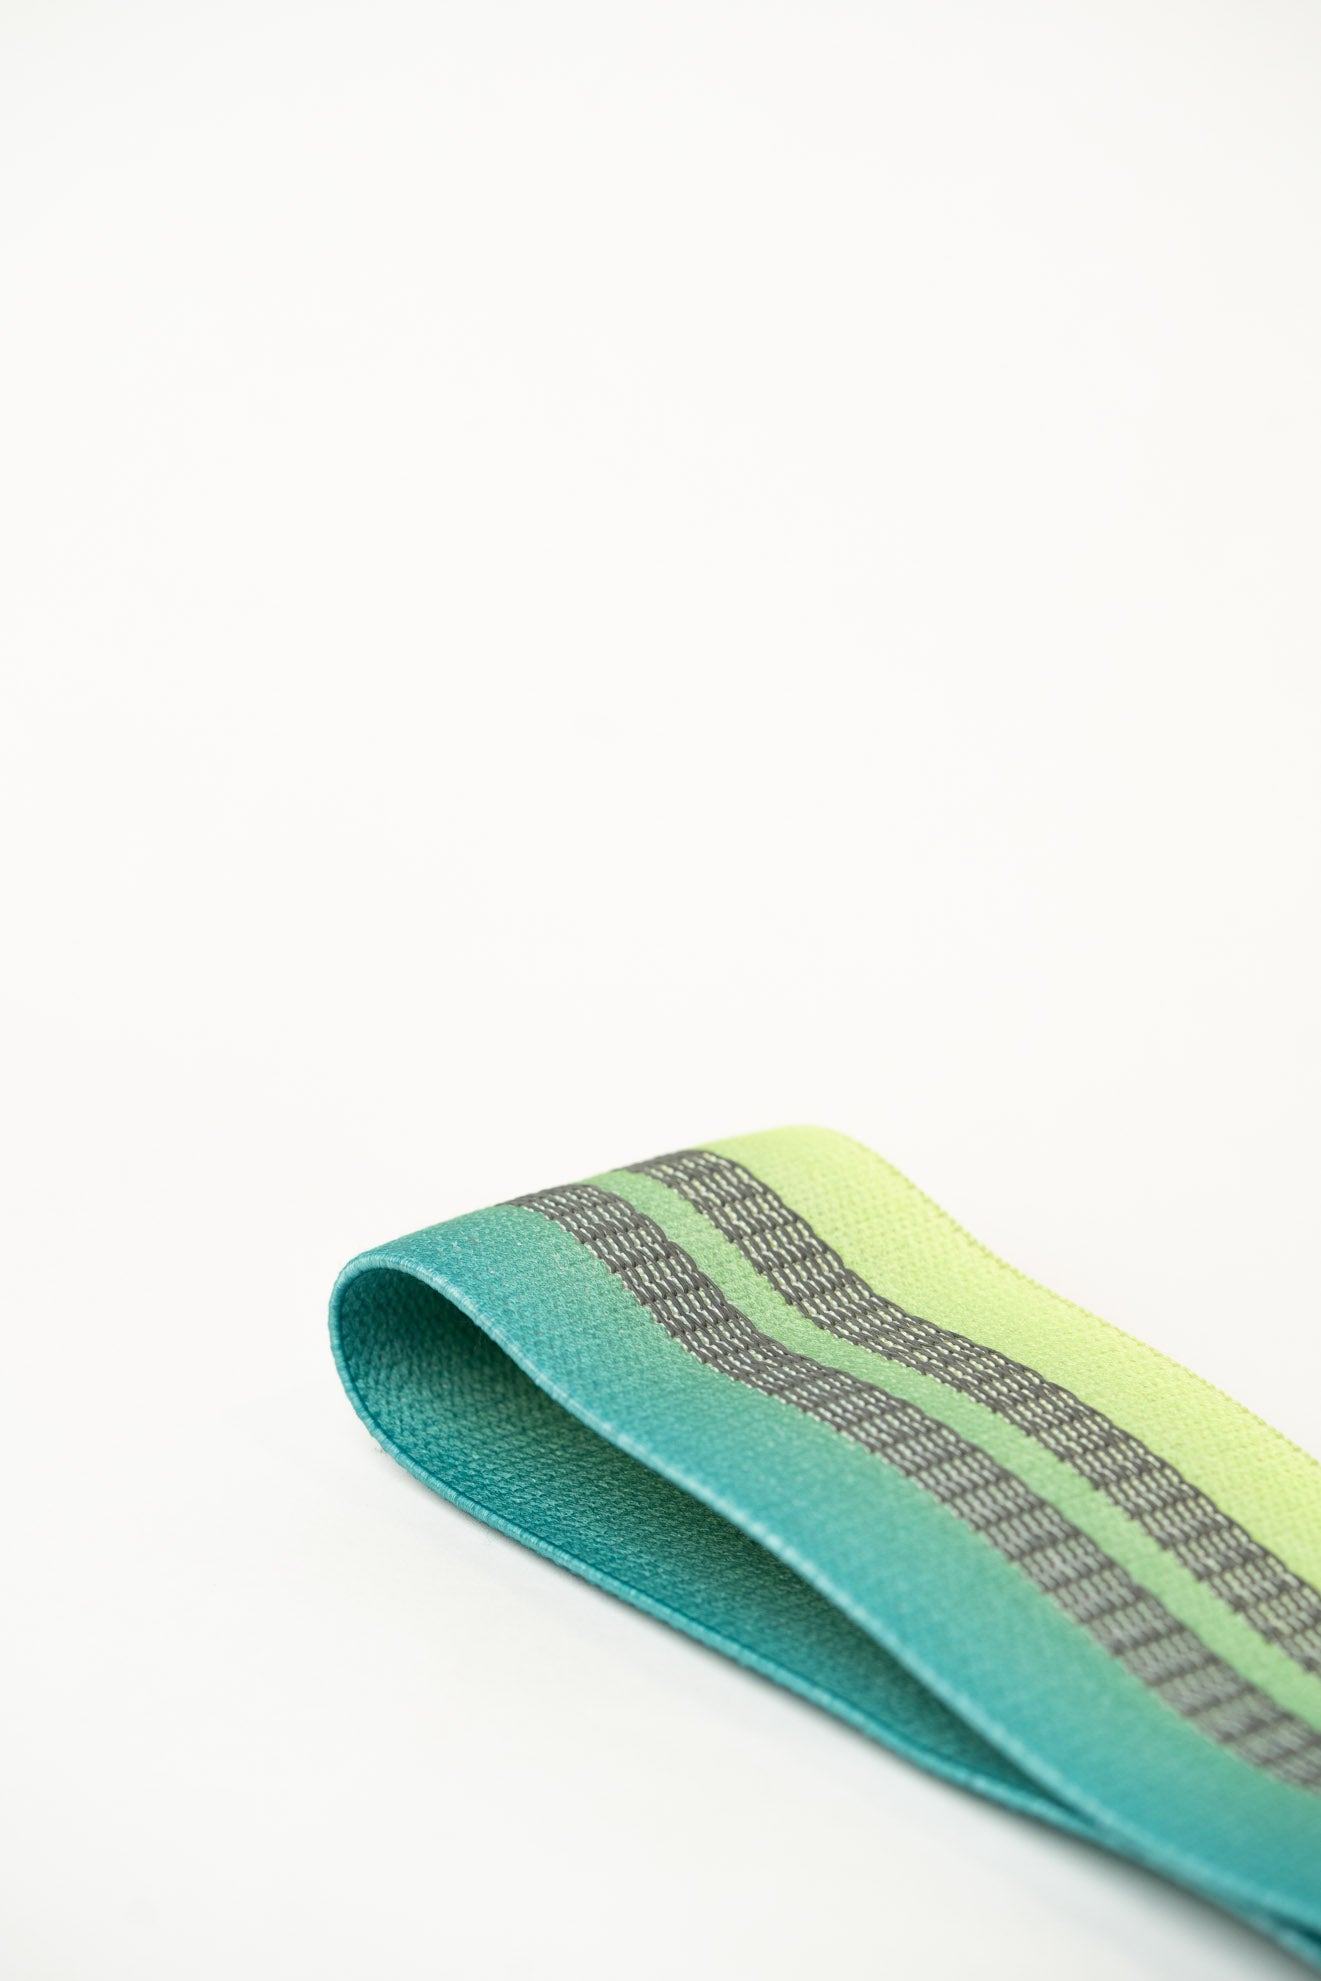 inside of uppper hip resistance band green ombre